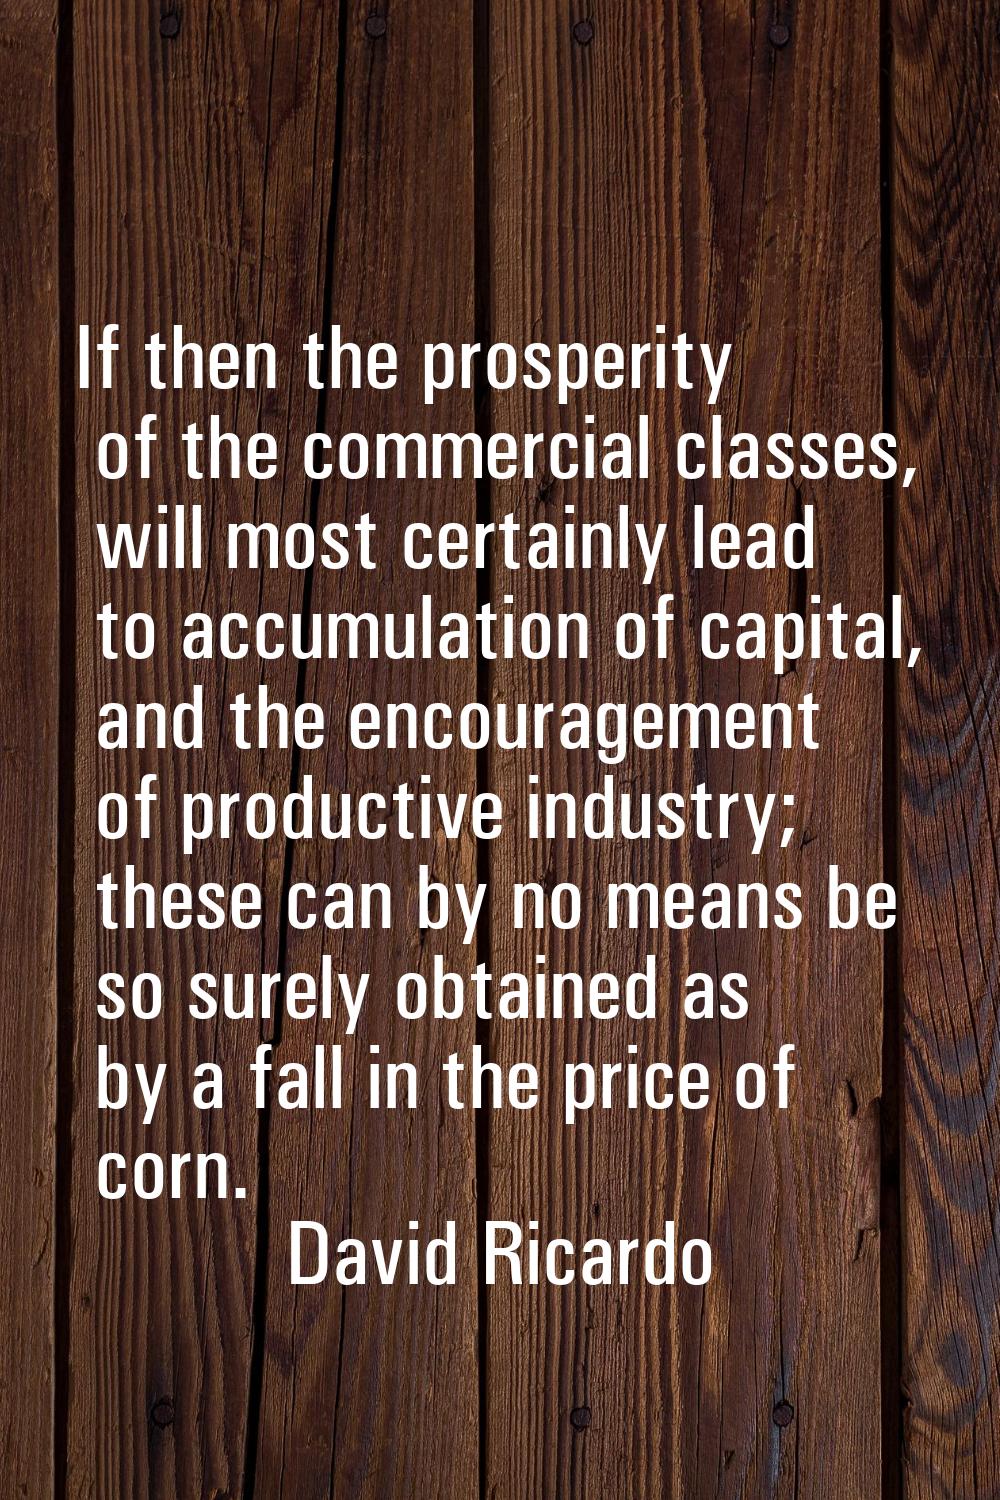 If then the prosperity of the commercial classes, will most certainly lead to accumulation of capit